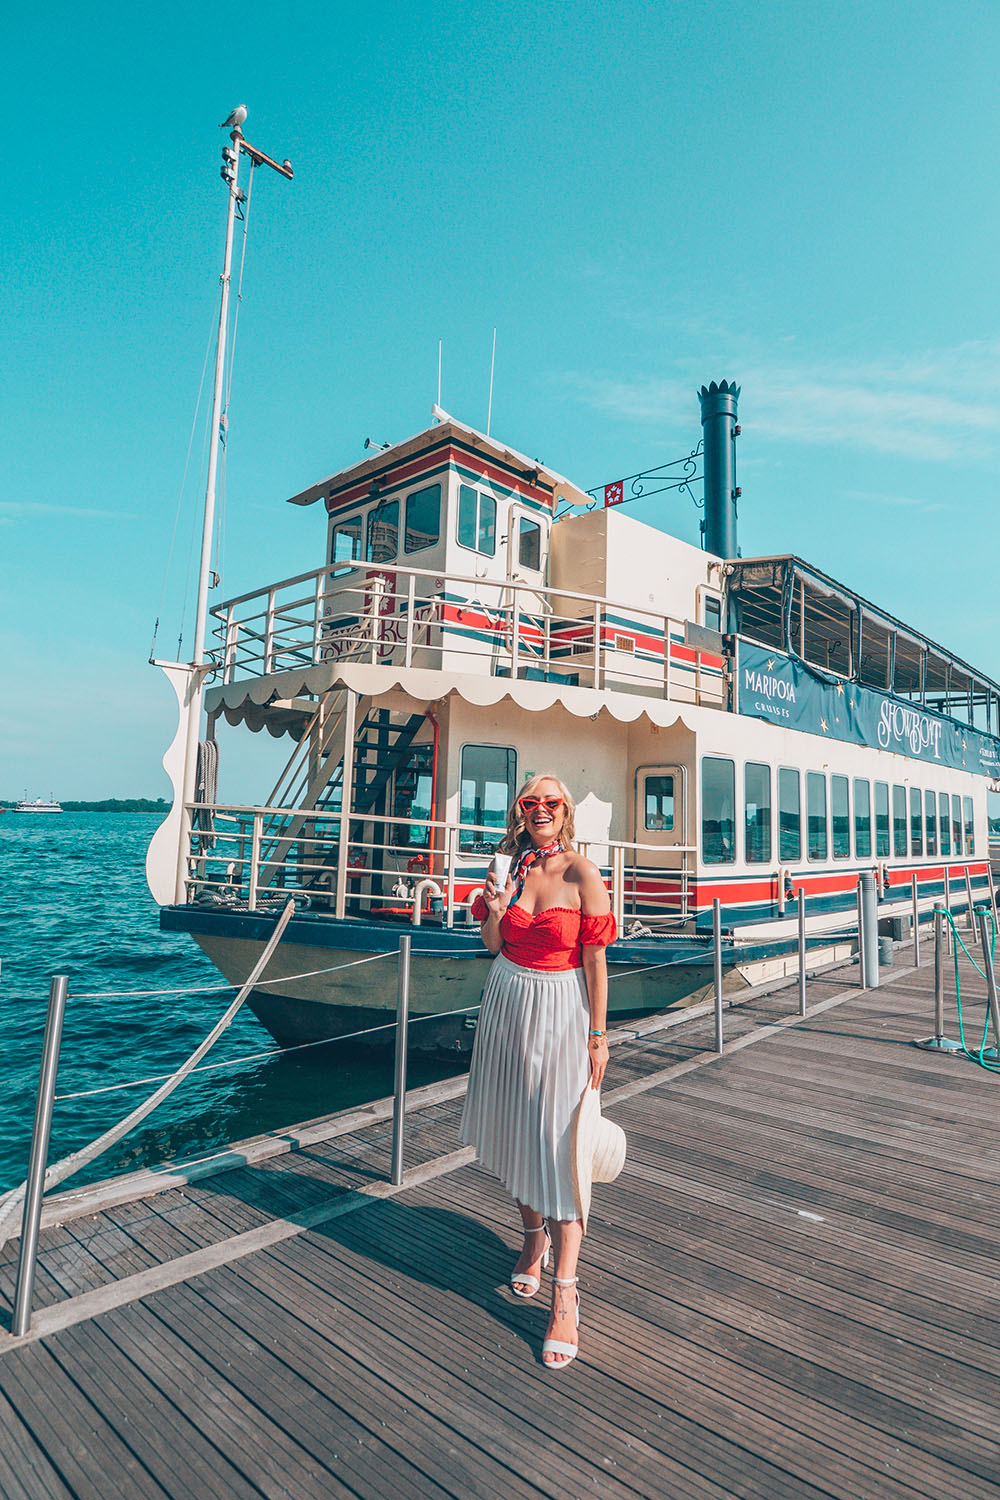 If you're planning on visiting Toronto soon and hoping to get some great photos while you're there, you definitely don't want to miss this guide on the most instagrammable places in Toronto, outdoor edition! This guide features all sorts of incredible outdoor photography locations in Toronto and the GTA. Pictured here: Toronto Harbourfront